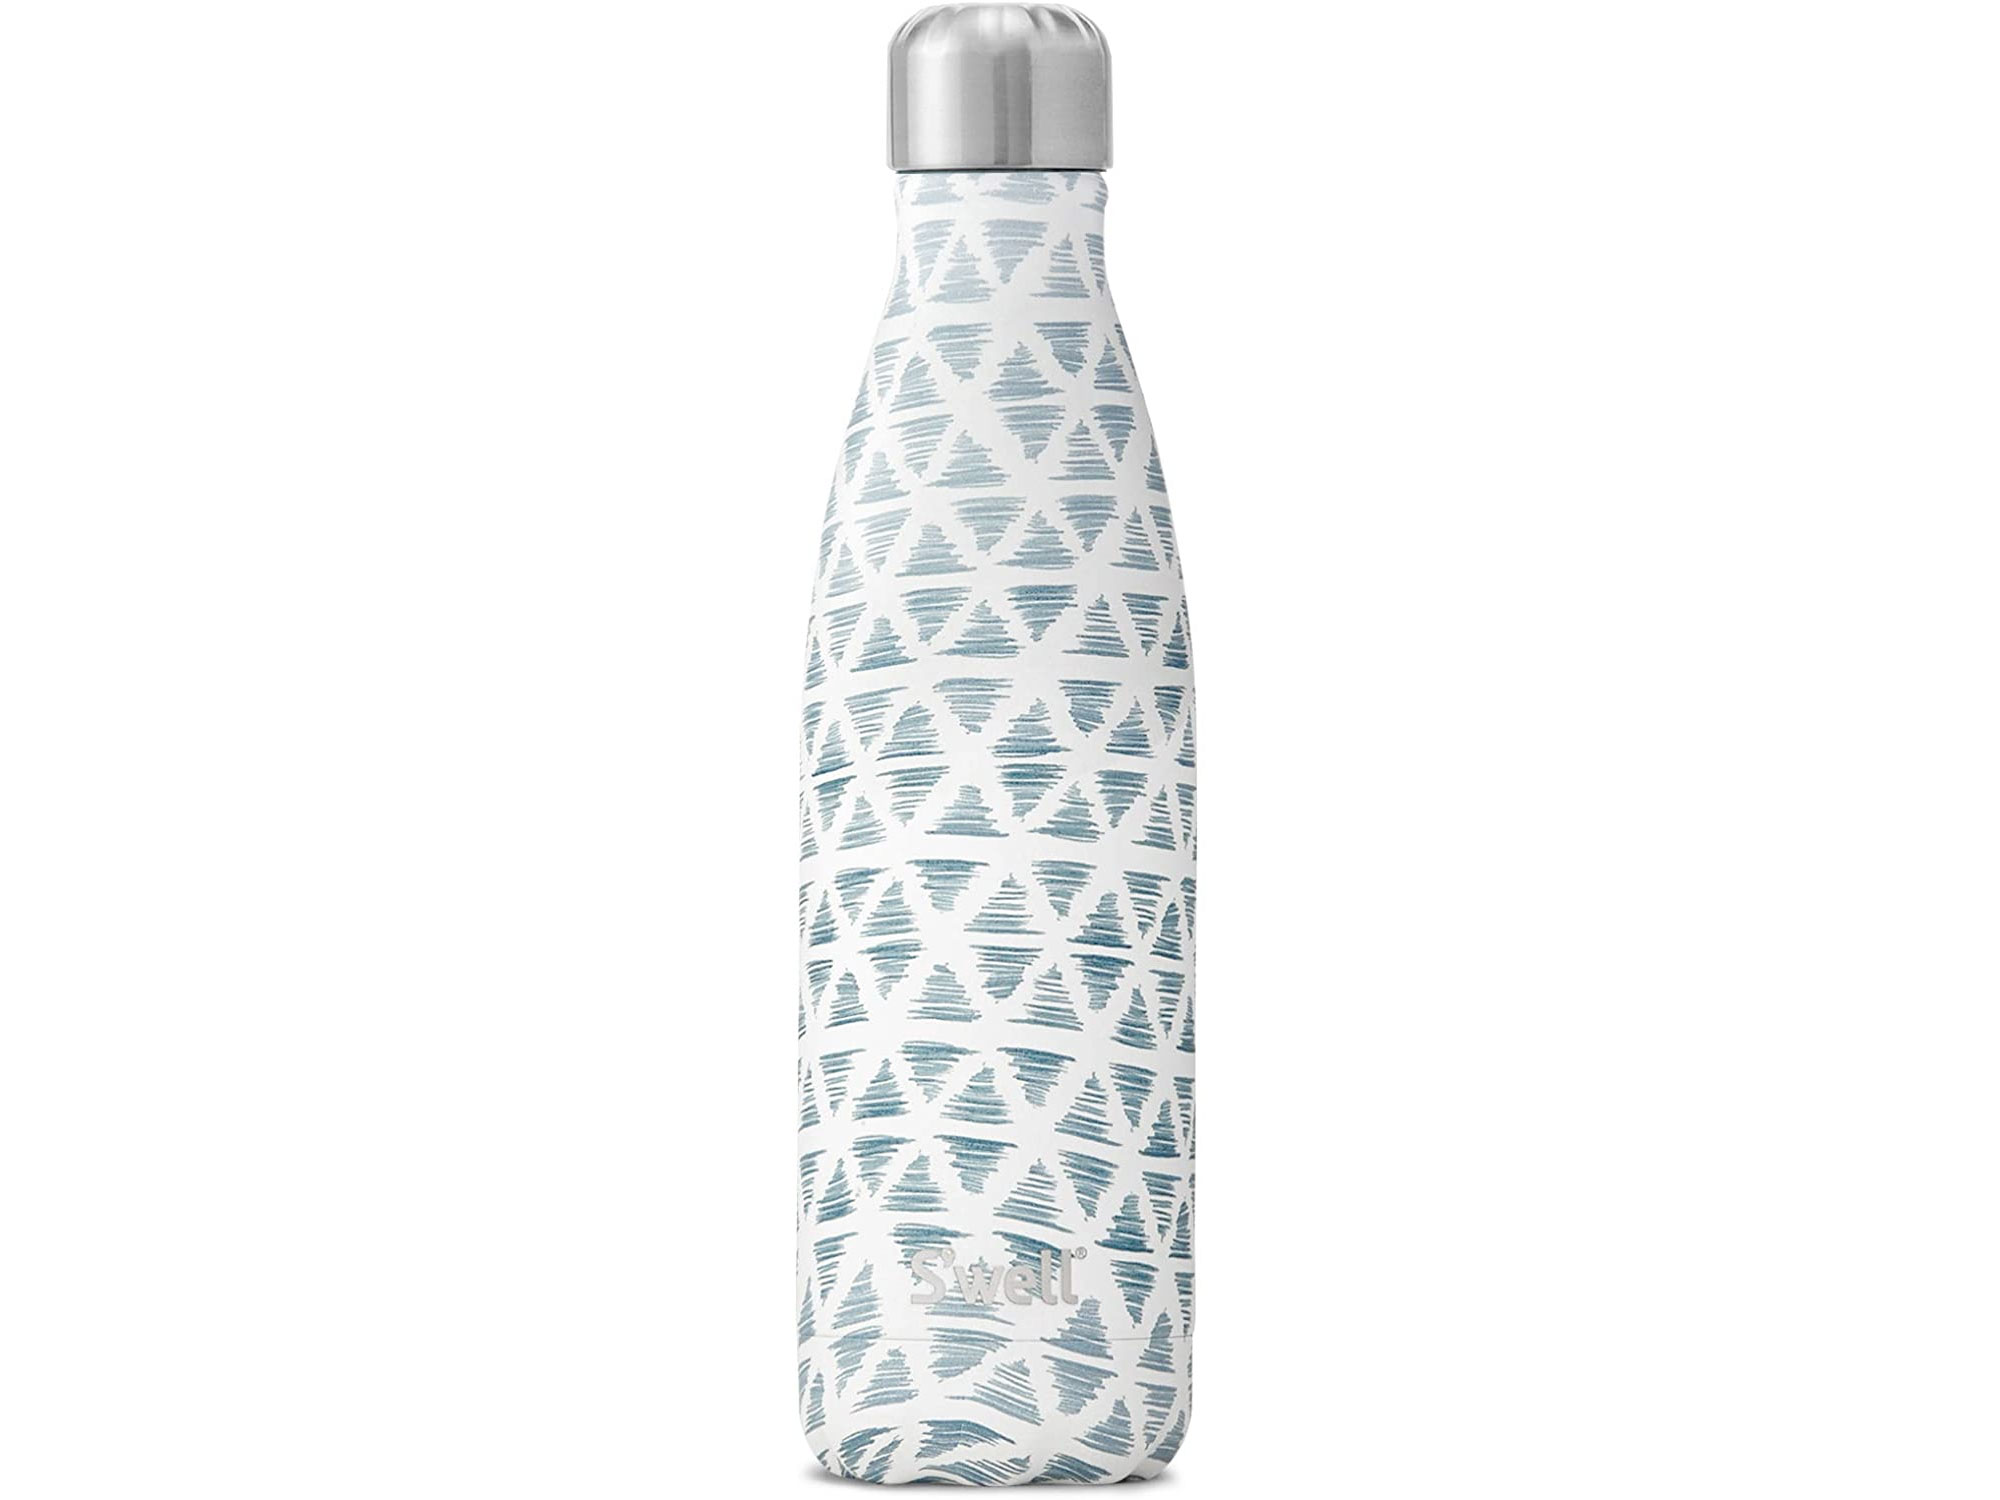 Amazon：S’well Vacuum Insulated Stainless Steel Water Bottle (17 oz)只賣$26.67